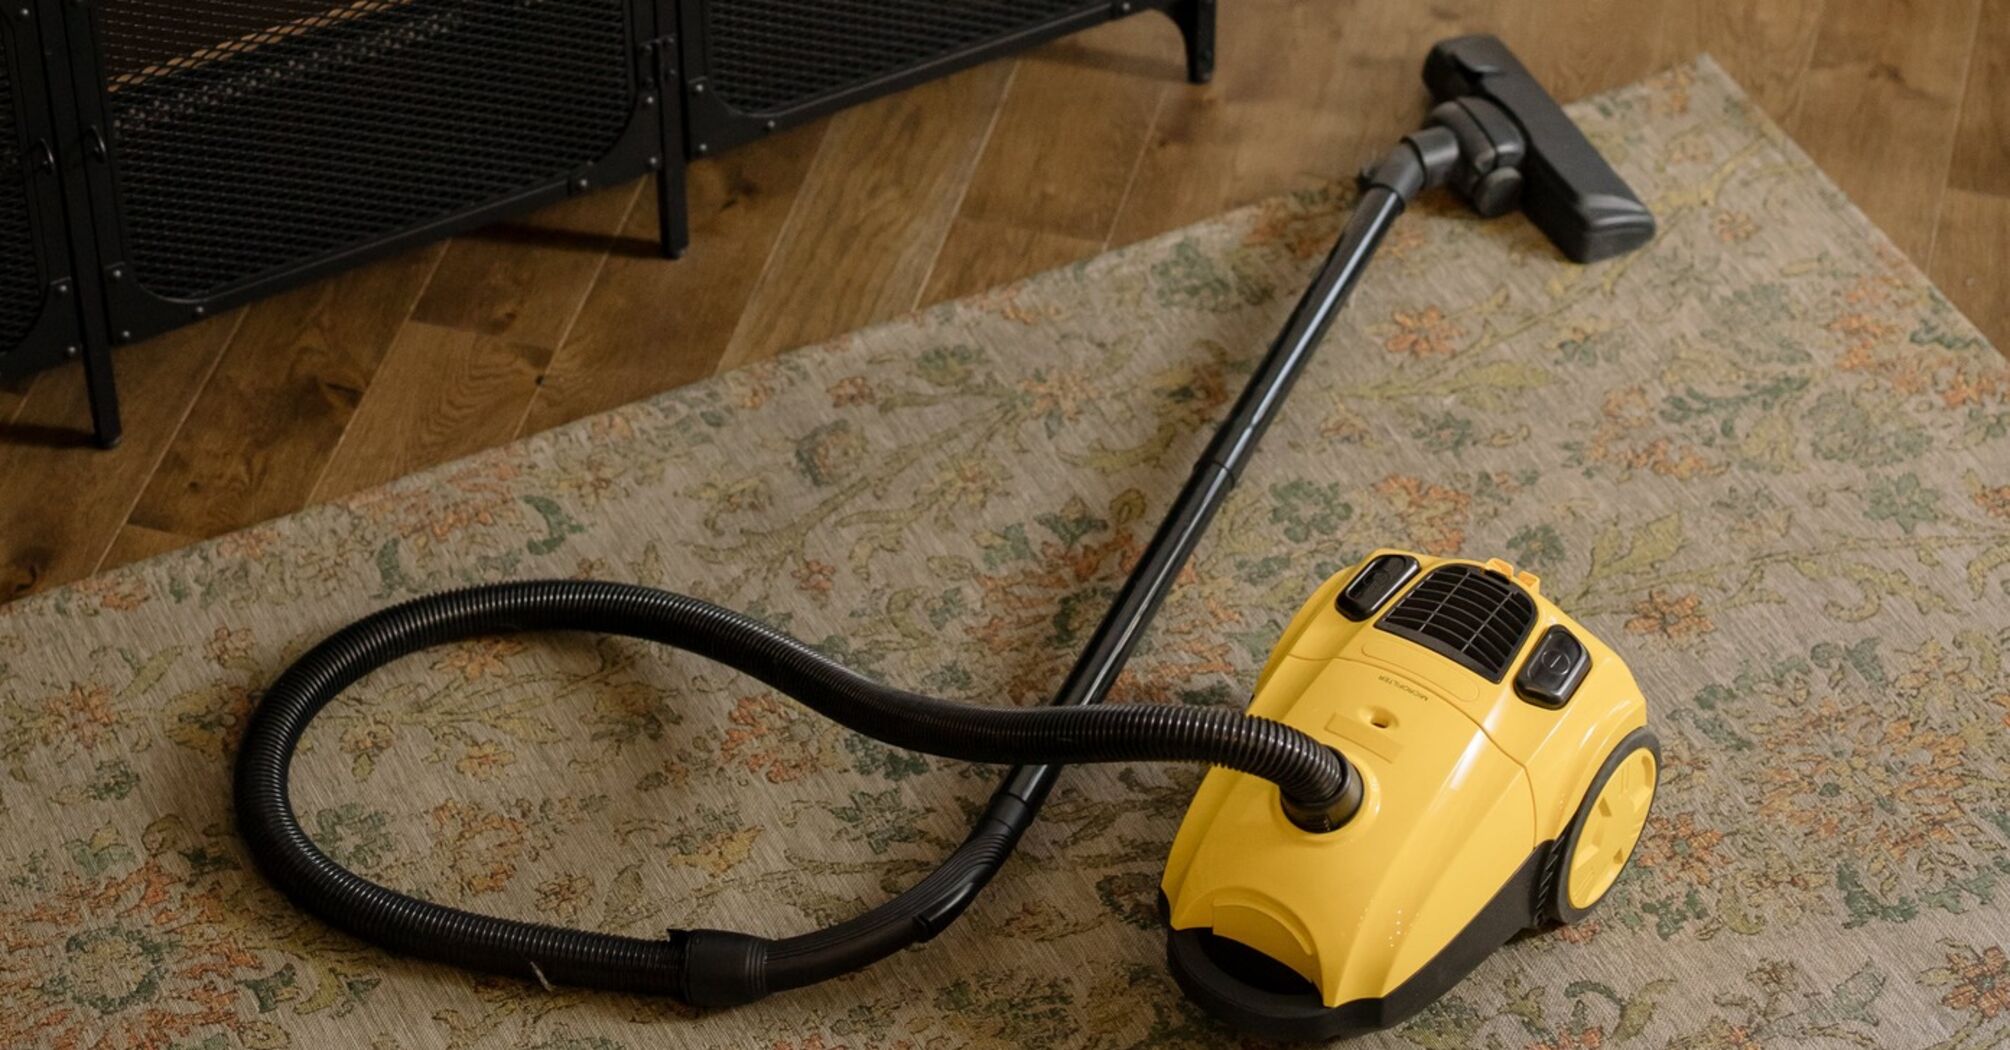 How to remove an unpleasant odor in a vacuum cleaner: 5 effective tips